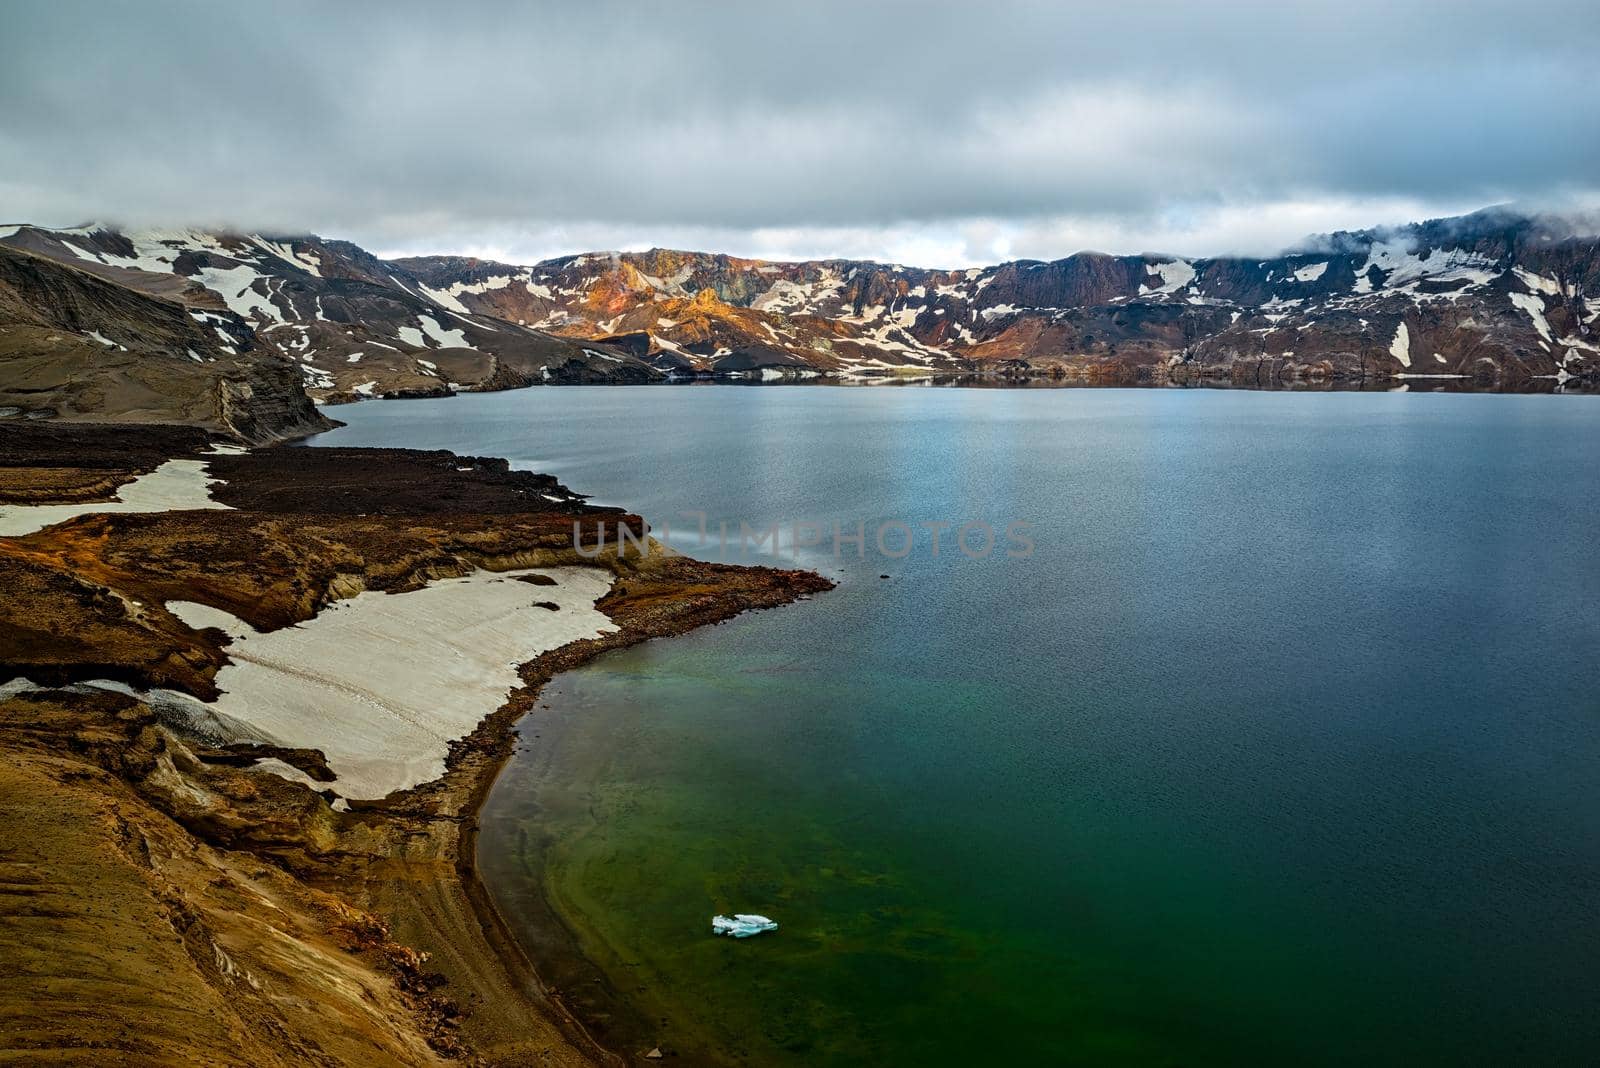 Mount Askja lake in a cloudy day, Iceland